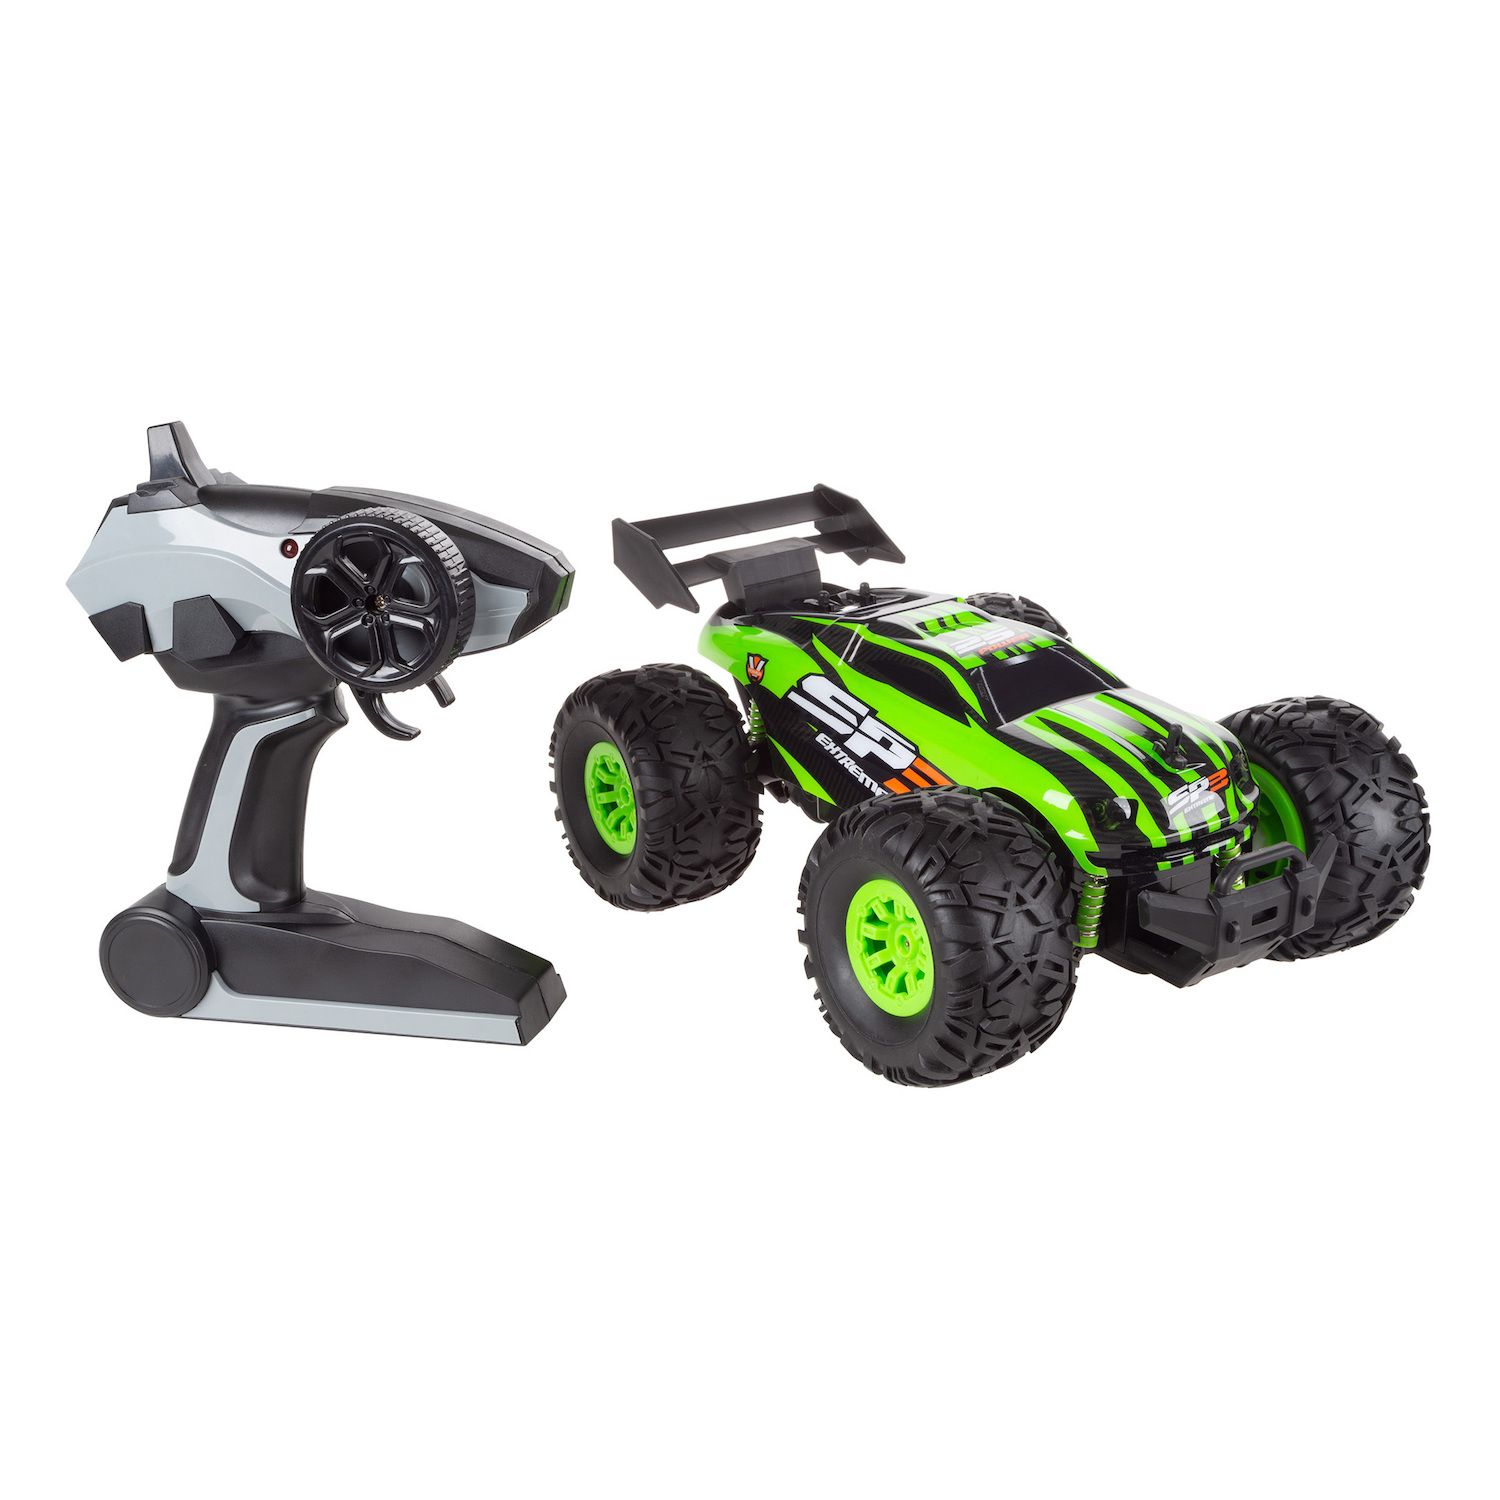 Image for Hey! Play! Remote Control Monster Car - 1:16 Scale, 2.4 GHz RC Off-Road Rugged Toy Vehicle with Spring Suspension & Oversized Wheels at Kohl's.